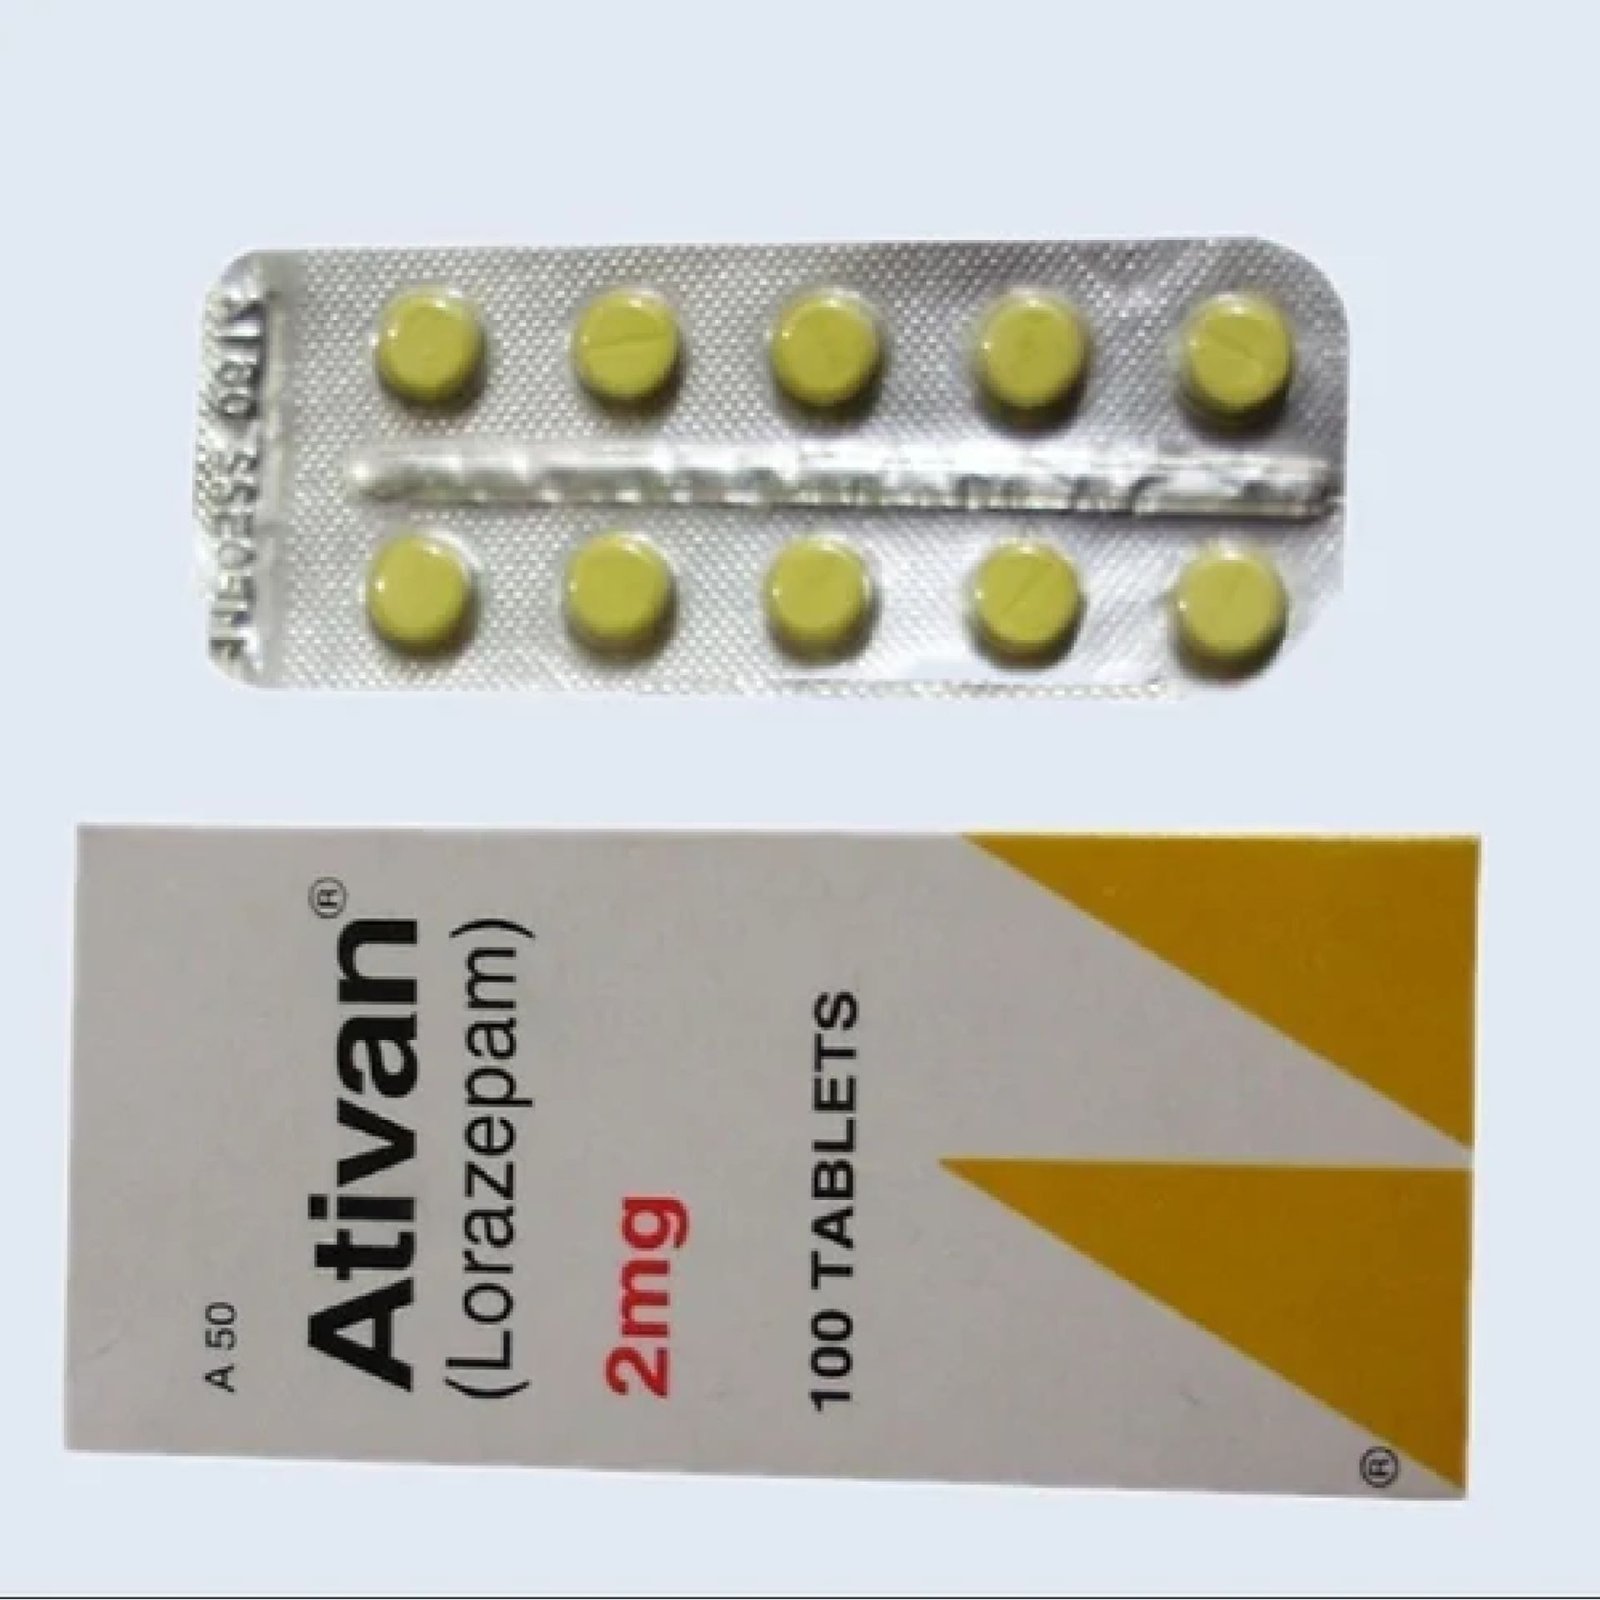 Buy Ativan (Lorazepam) 2mg Tablet at Rs. 7400 from Likeshop.pk